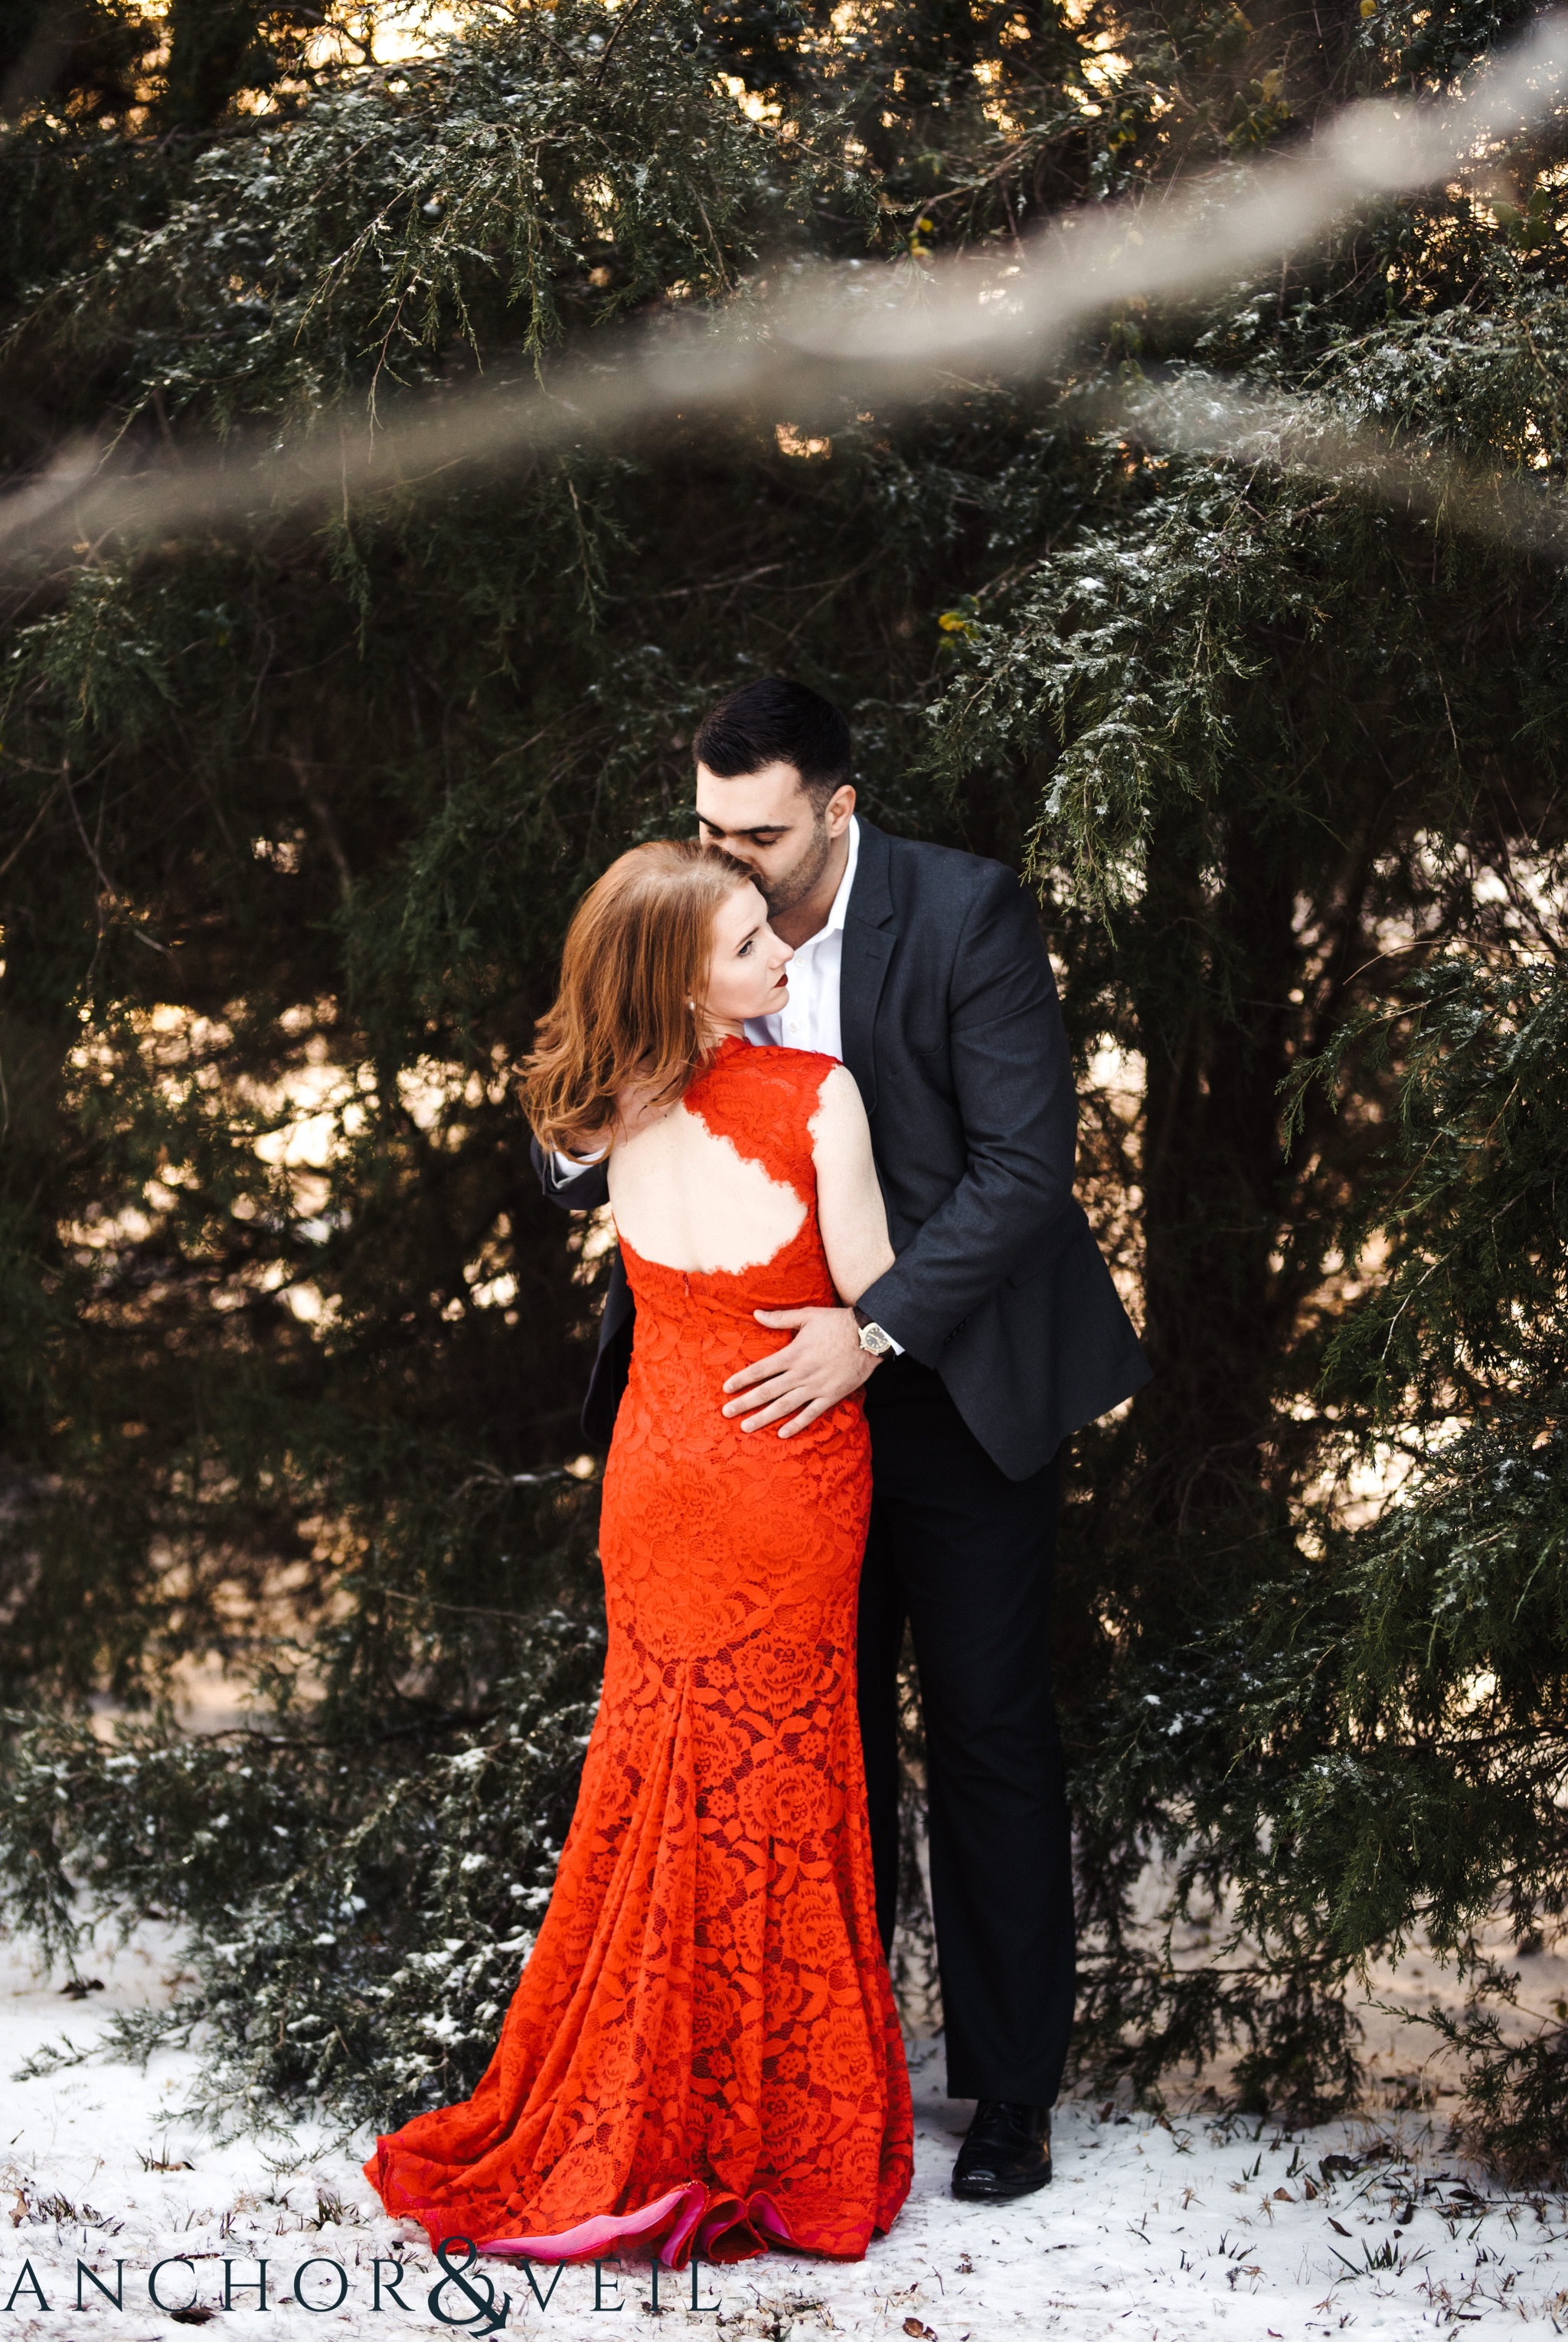 the beautiful red dress during their Charlotte Snow engagement session in the woods